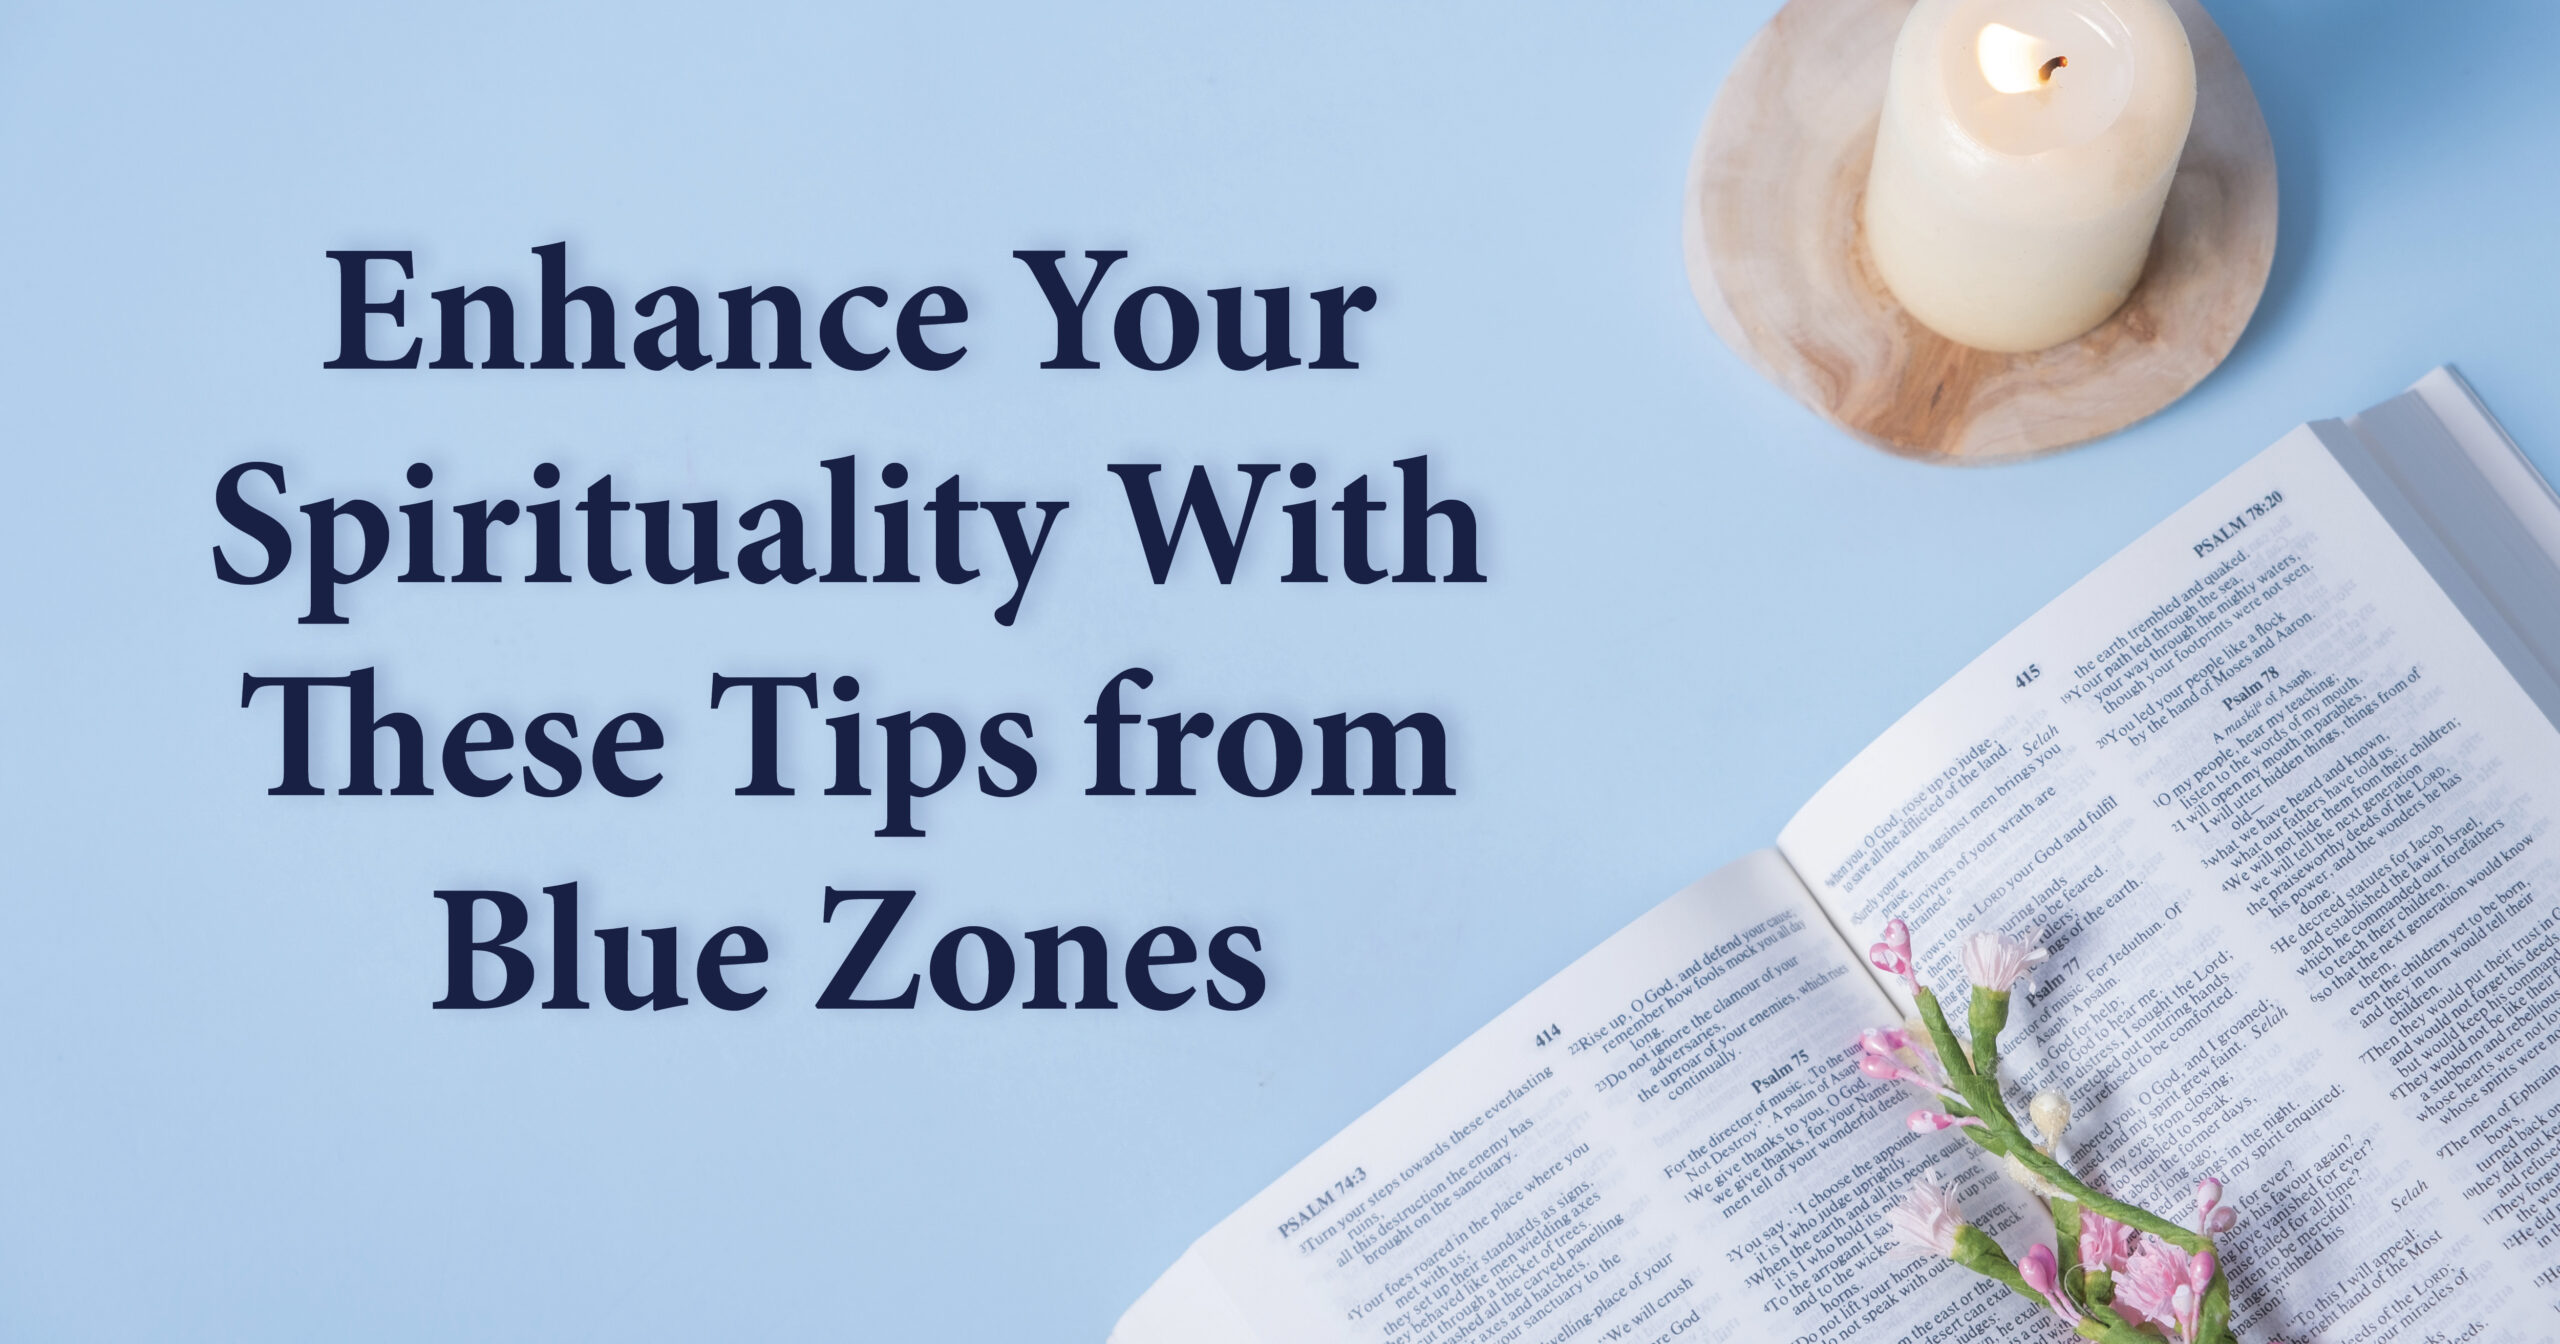 Enhance Your Spirituality With These Tips from Blue Zones